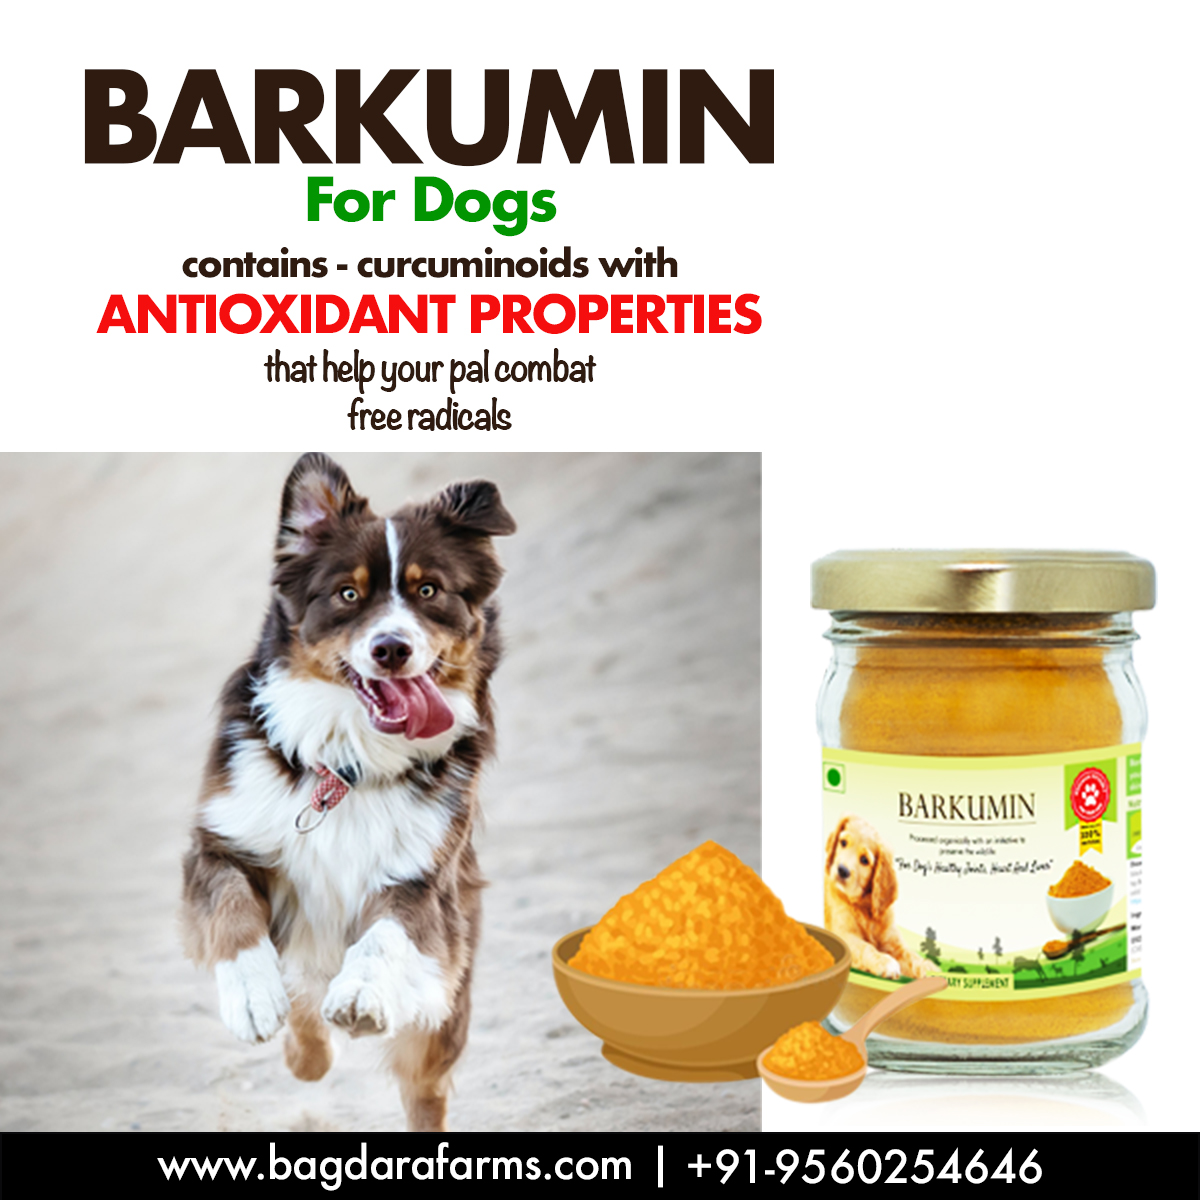 Turmeric for dogs dosage, Turmeric for dogs with cancer, Turmeric for dogs joint pain, Turmeric for dogs skin allergies, Turmeric for dogs arthritis, Turmeric for dogs liver, Turmeric for dogs teeth, Turmeric for dogs golden paste, Turmeric for dogs hotspots, Turmeric for dogs UTI